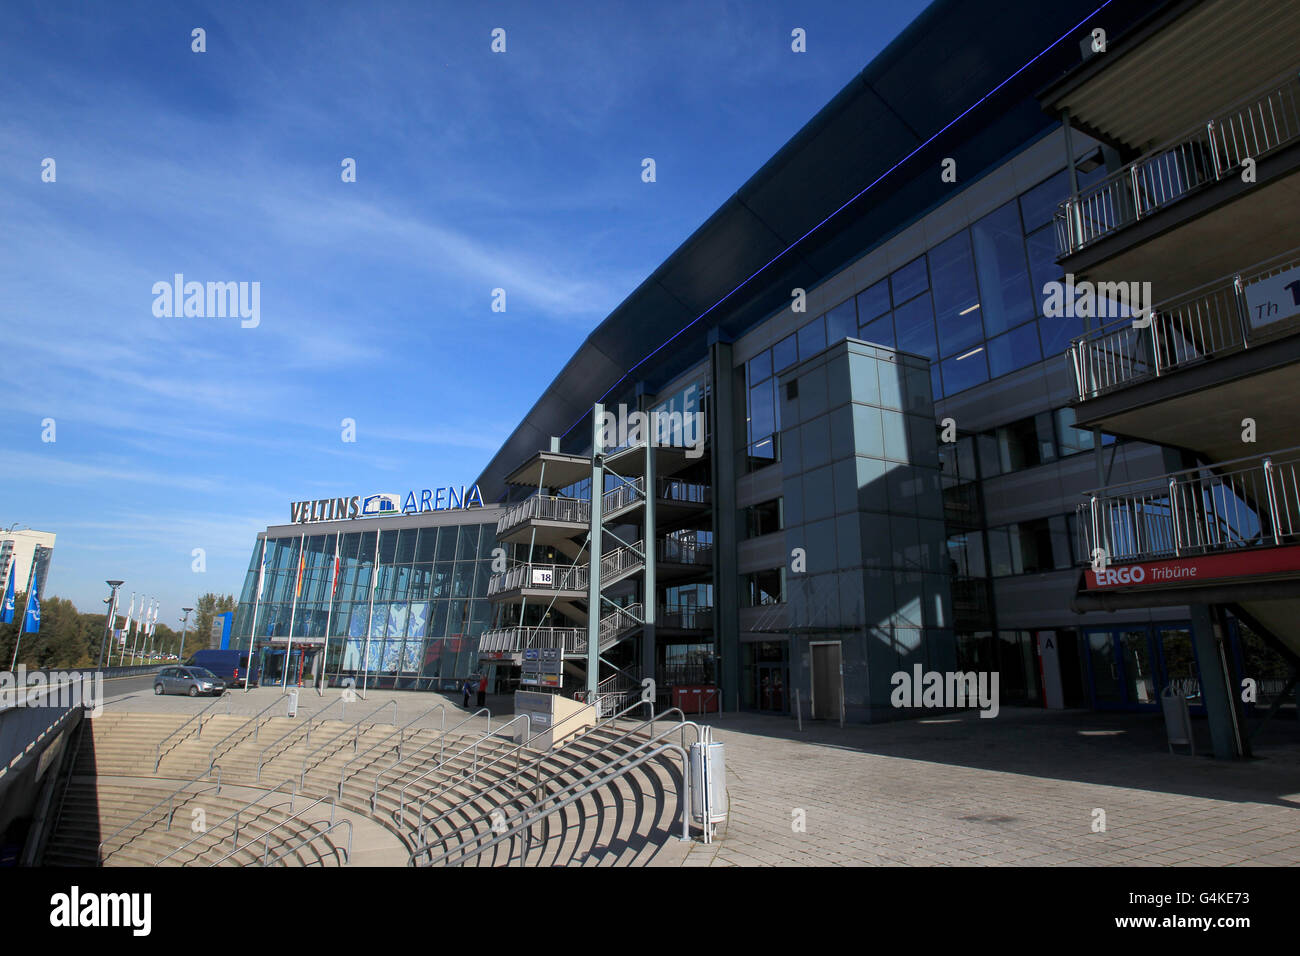 A general view of the exterior of the Veltins Arena, home of Schalke 04 Stock Photo